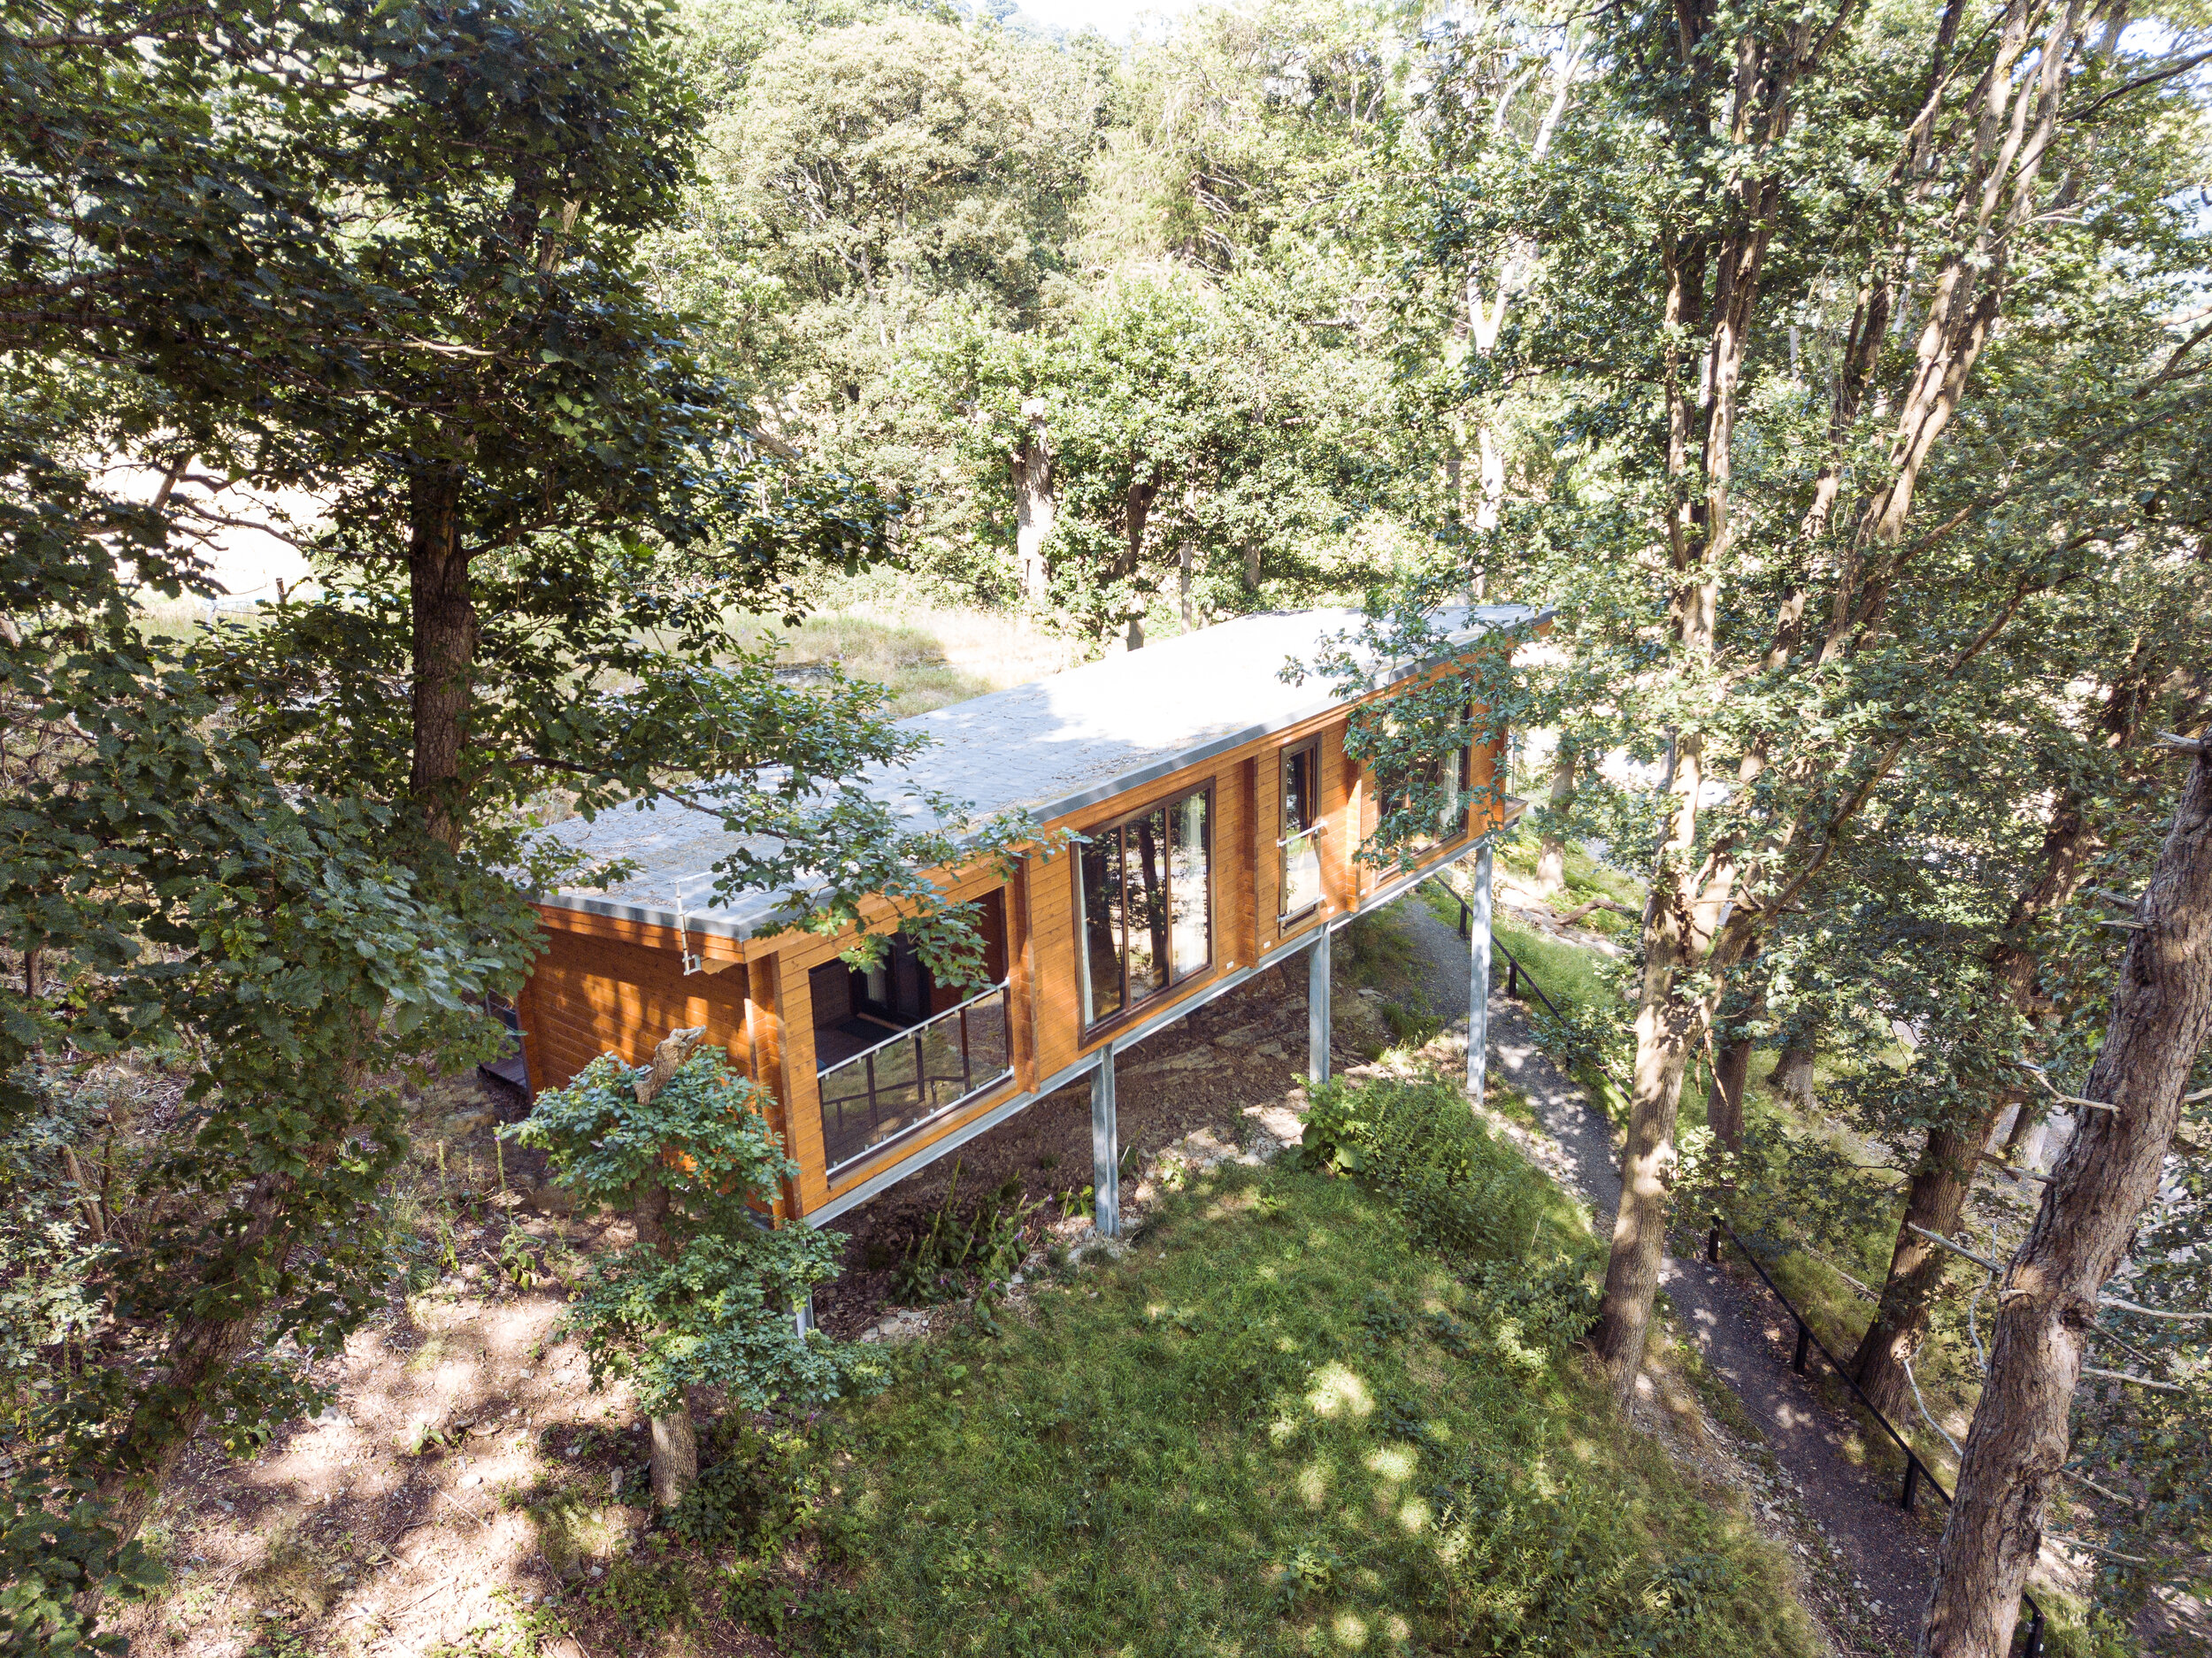   FOREST LODGE  